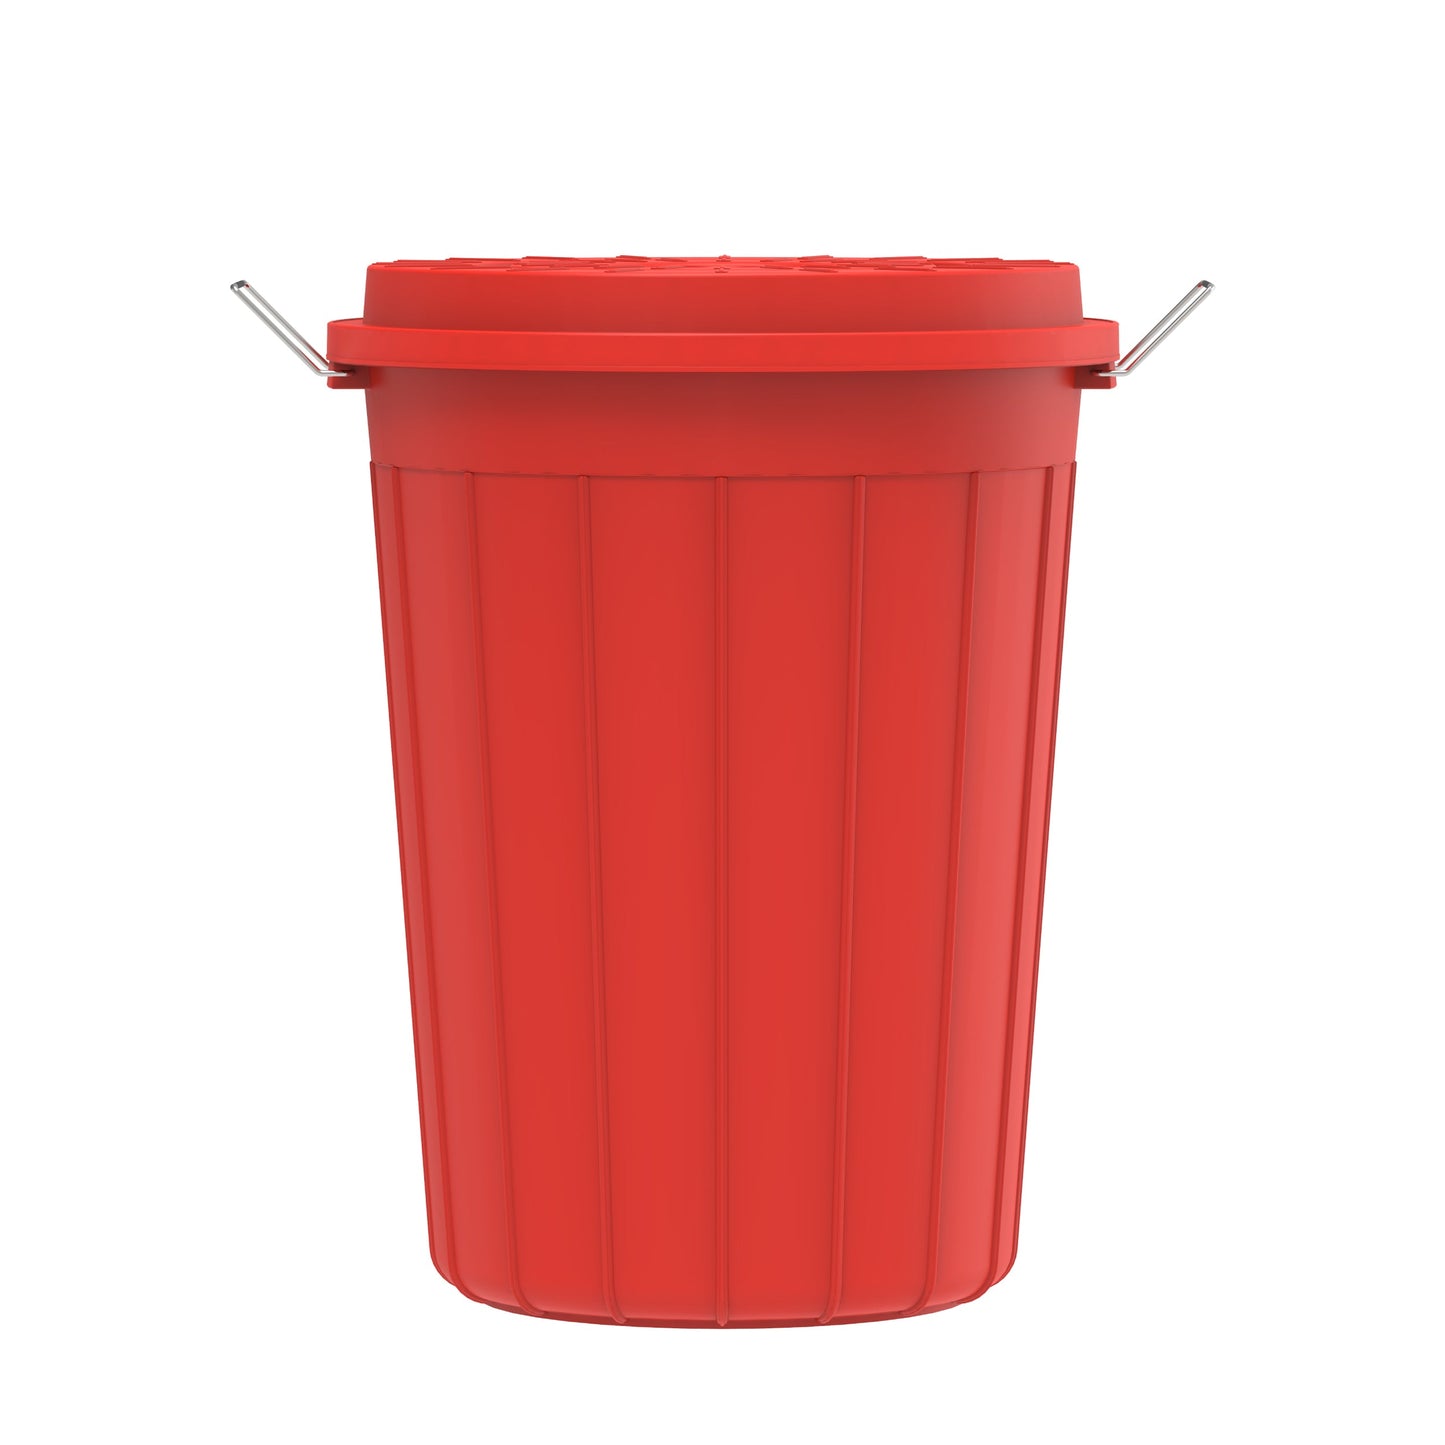 100L Round Plastic Drums with Lid